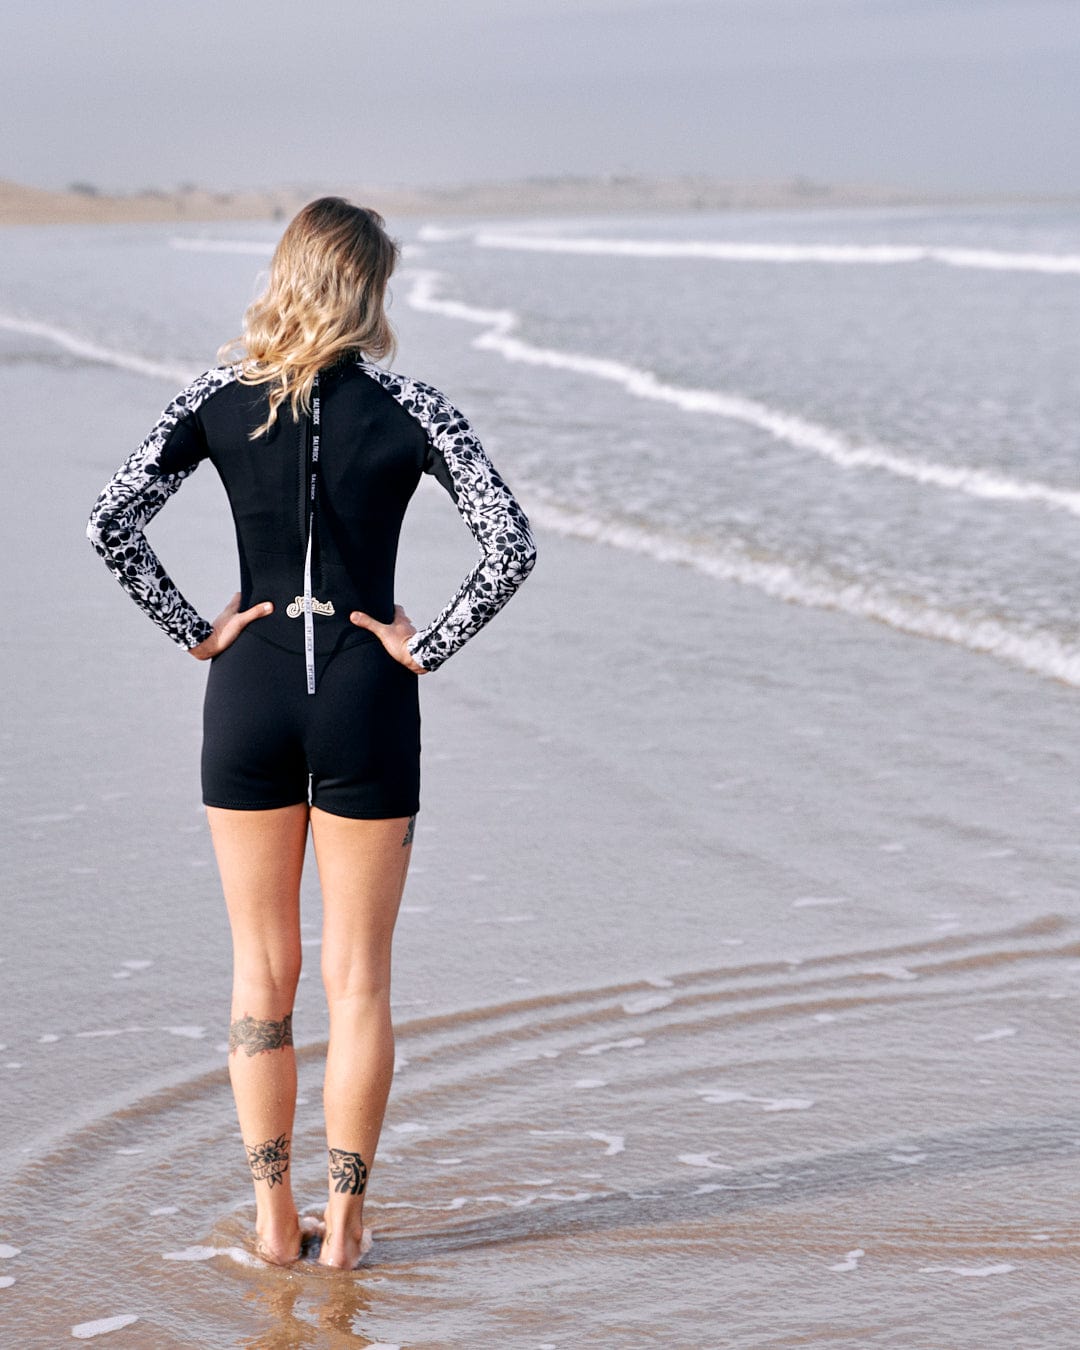 Woman in a Hibiscus - Womens Shortie Wetsuit - Black neoprene wetsuit by Saltrock standing at the shore, looking at the sea, with her back to the camera.